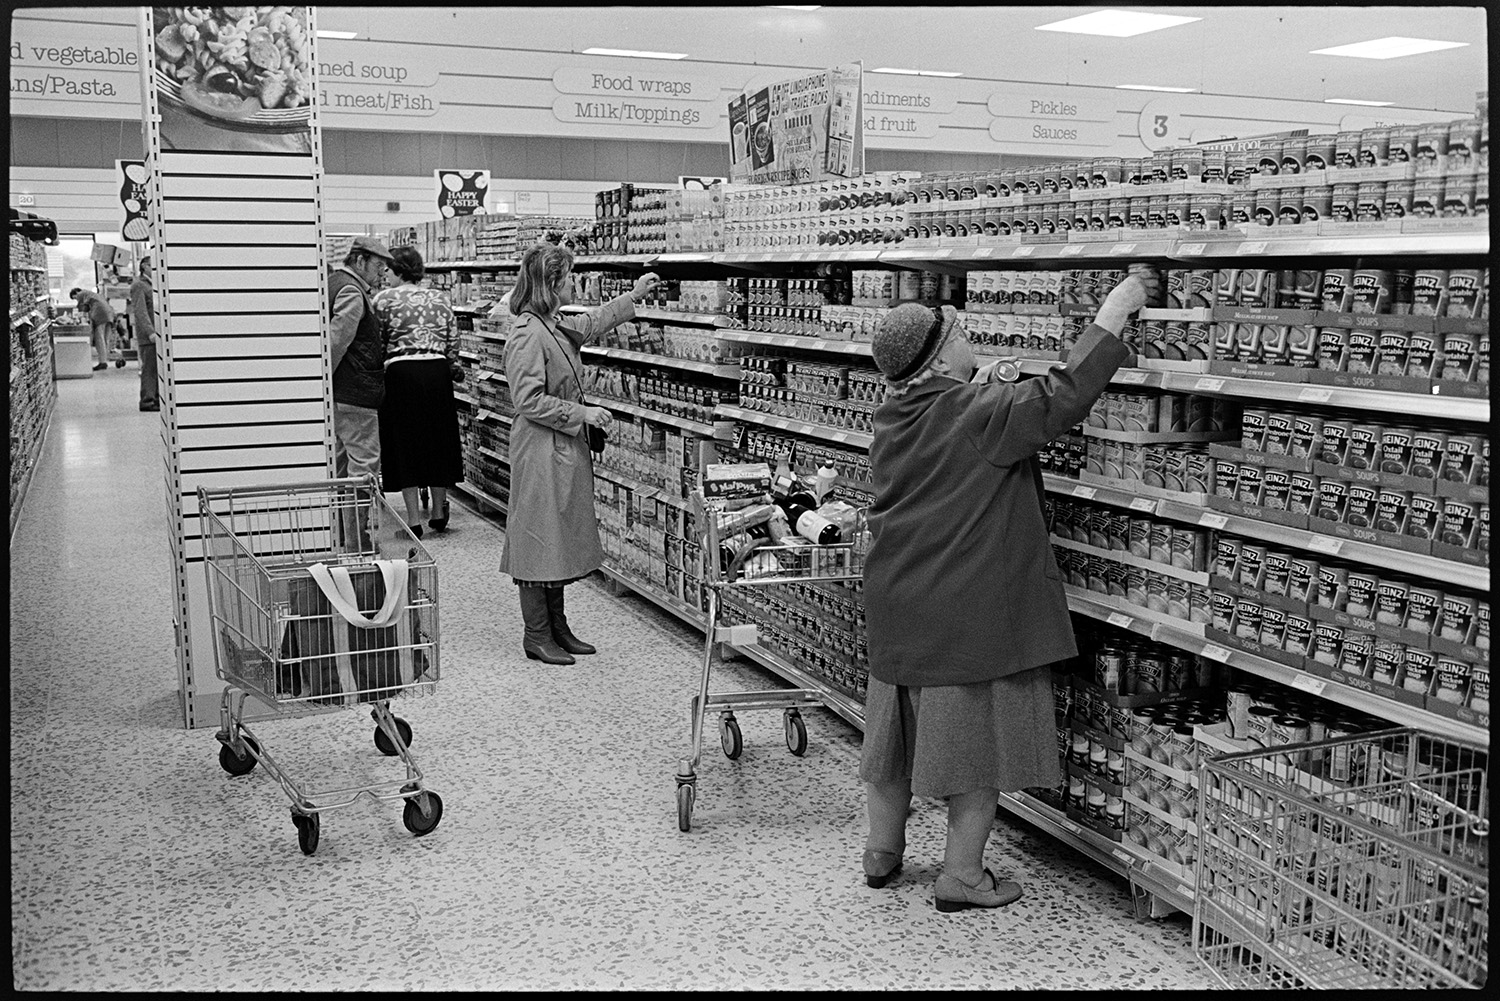 Interior of supermarket with people shopping, delivery lorry being unloaded. 
[People shopping in the Tesco supermarket in Barnstaple. Two women are selecting canned items from shelves in an aisle.]